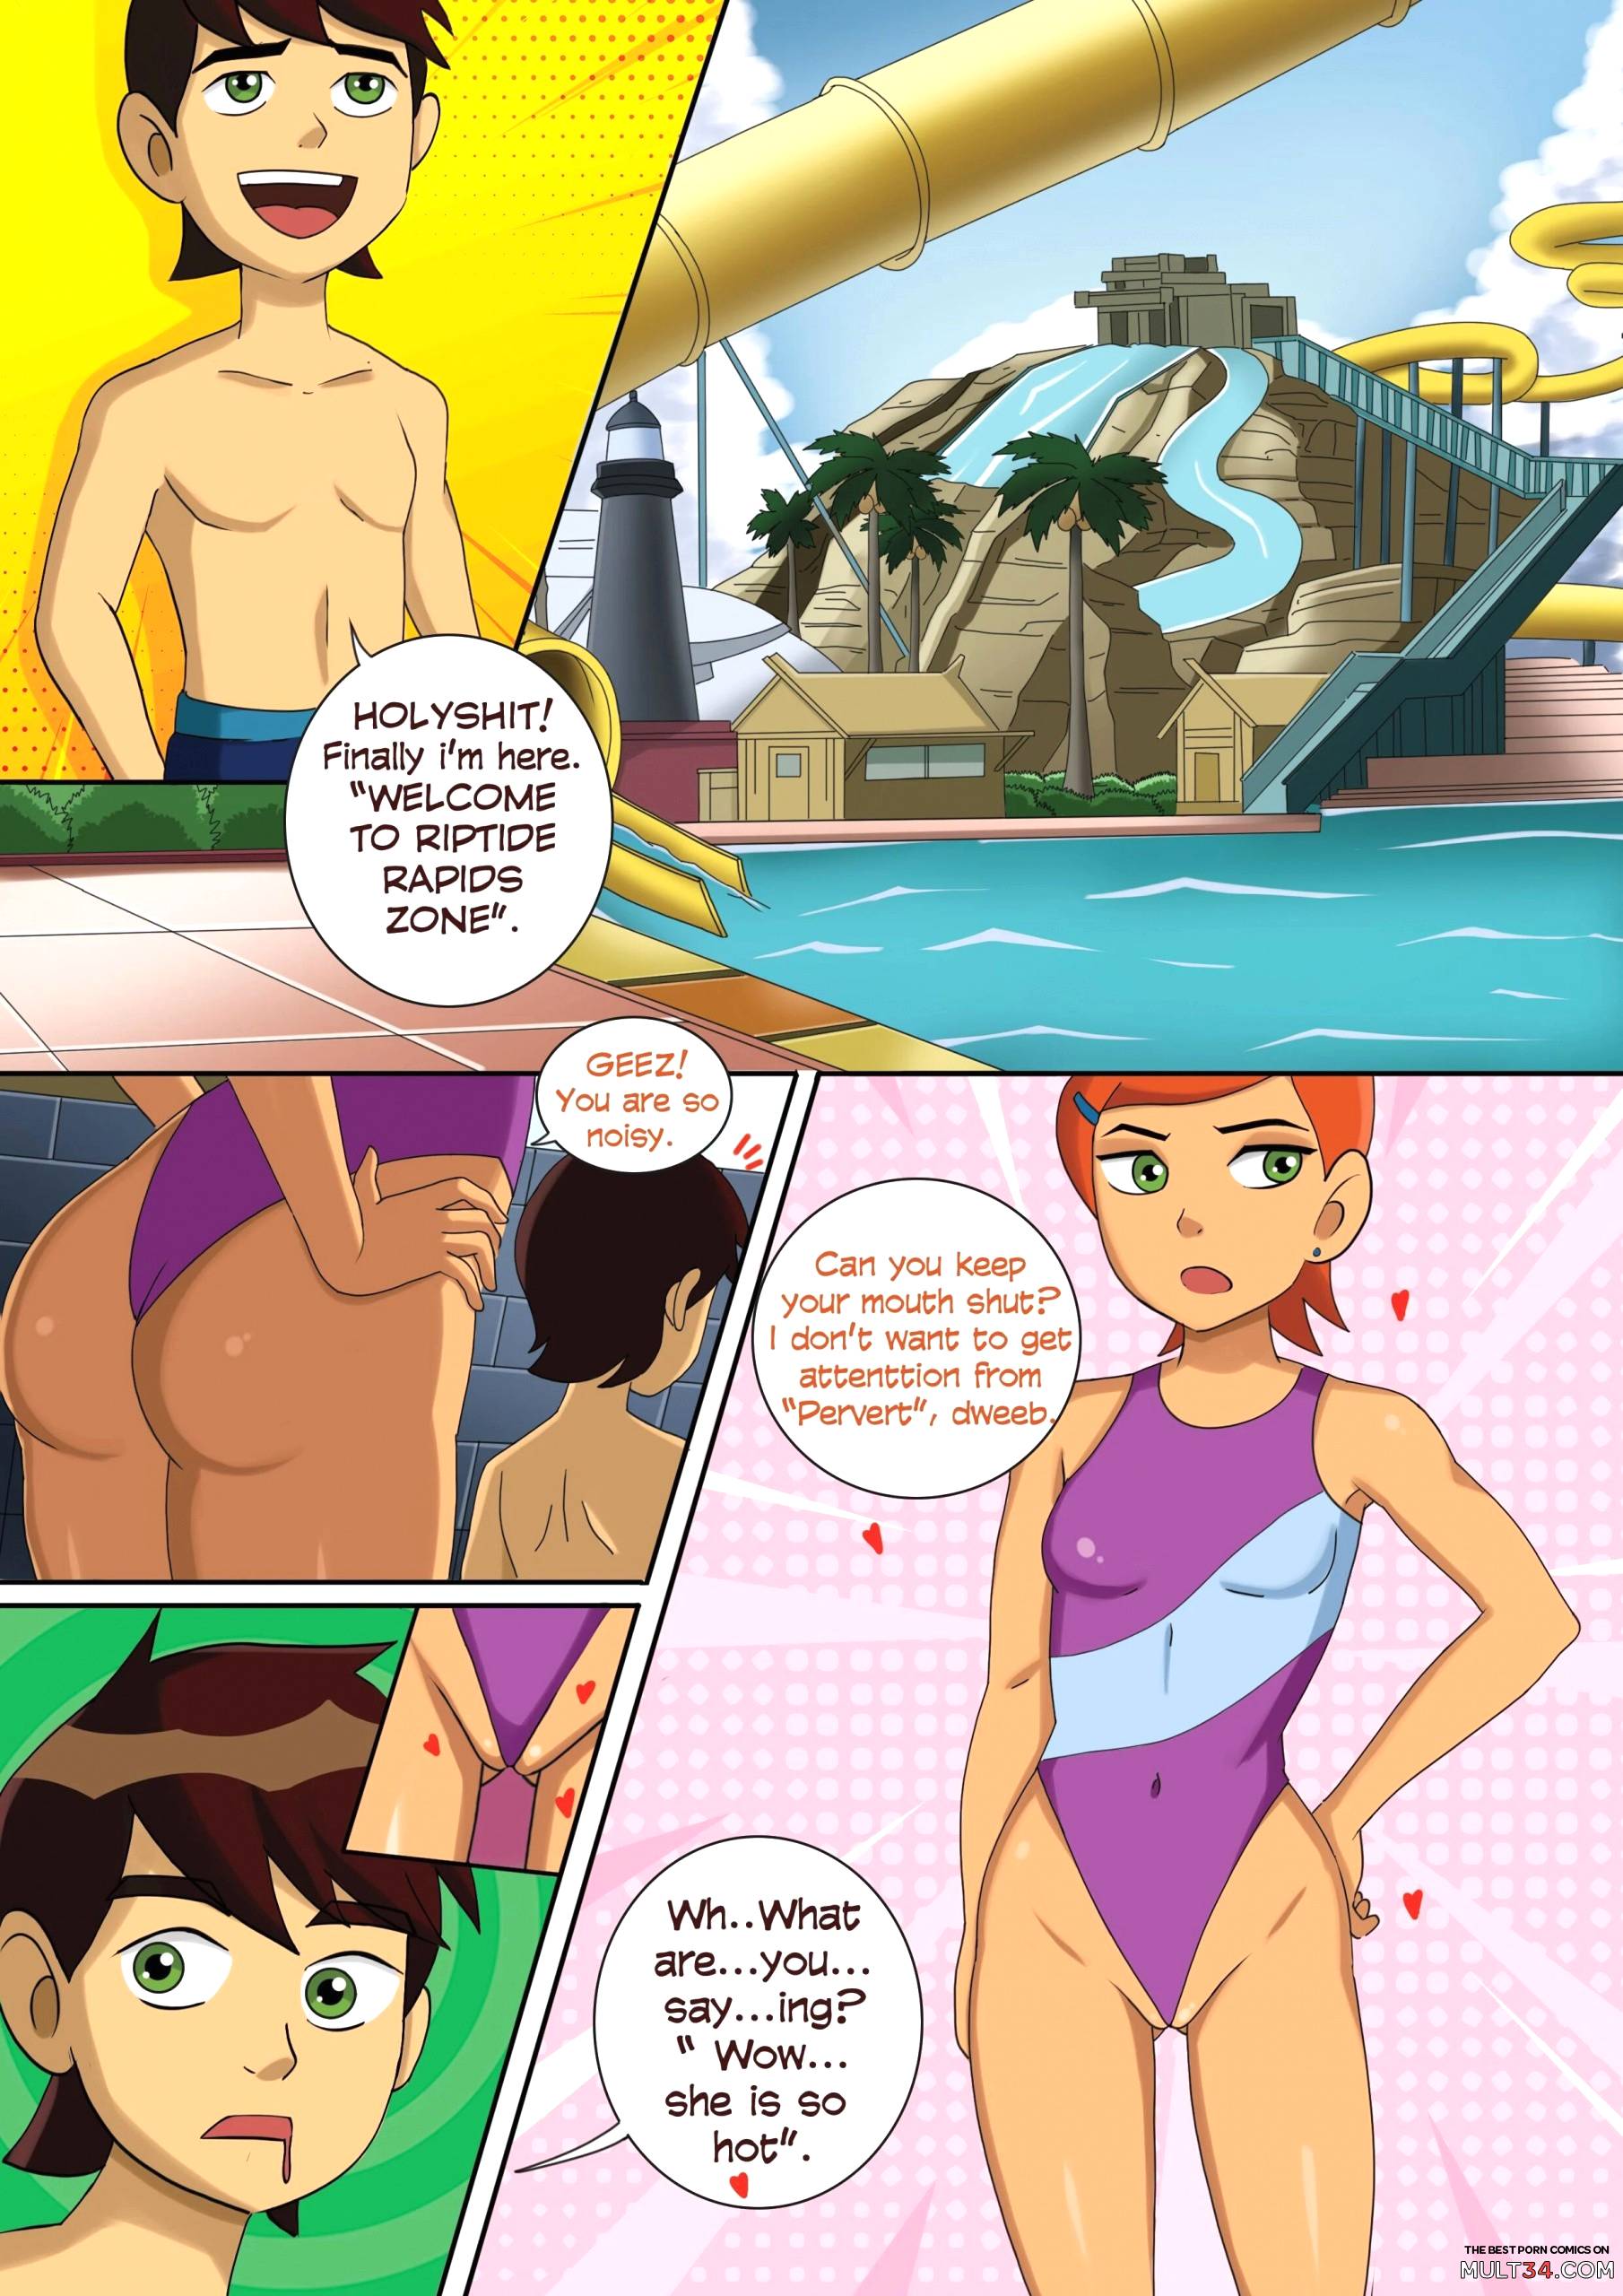 Vacation - A Trouble in Vacation porn comic - the best cartoon porn comics, Rule 34 |  MULT34